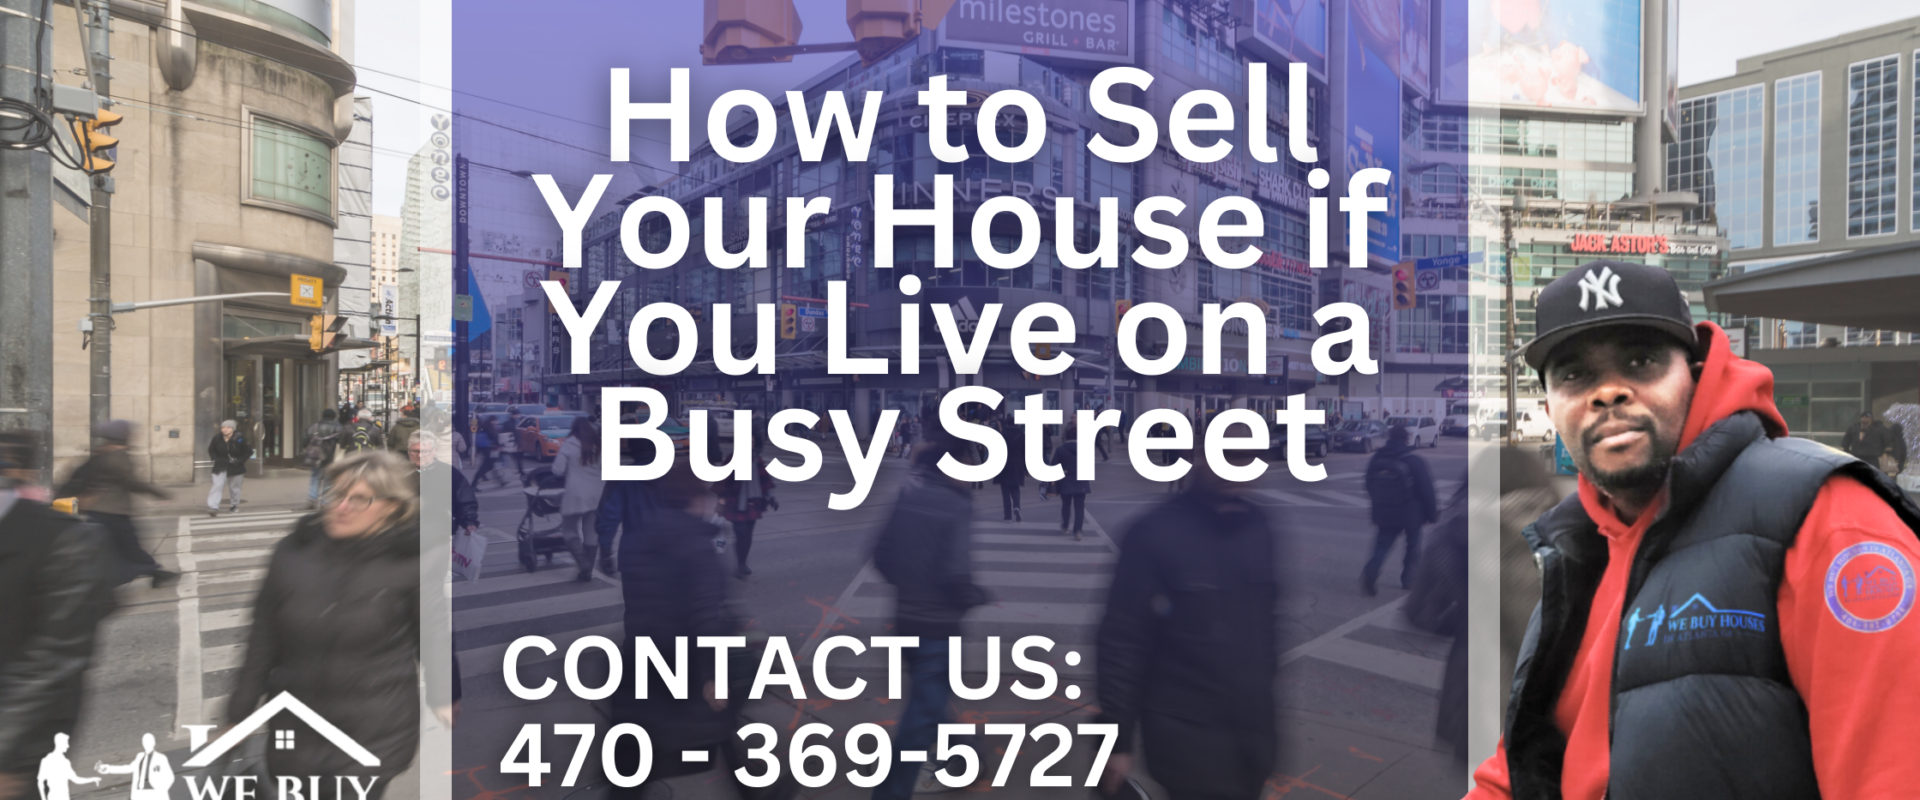 How to Sell Your House if You Live on a Busy Street